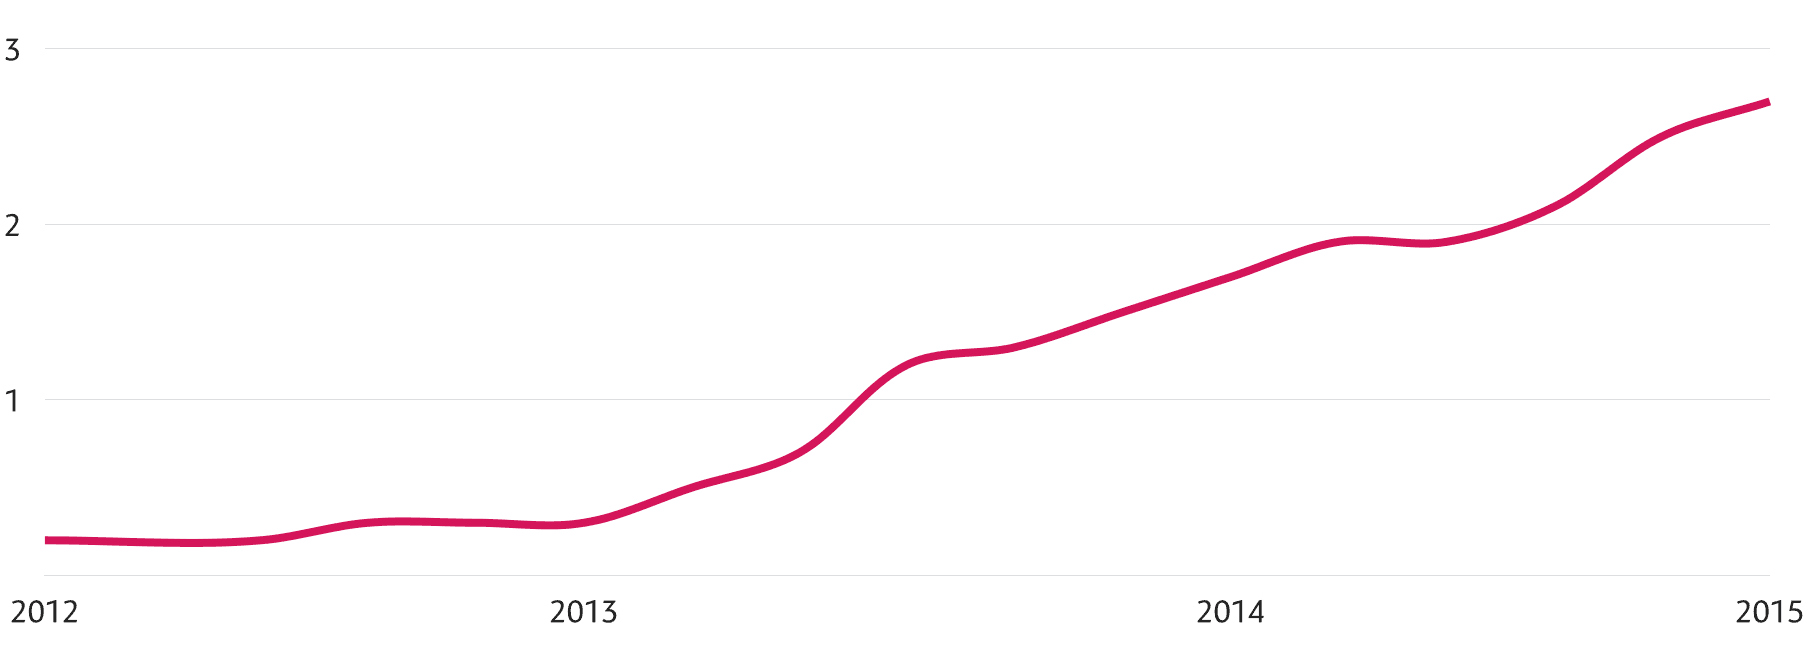 The increase in the number of font requests per page from 2012 to 2015.